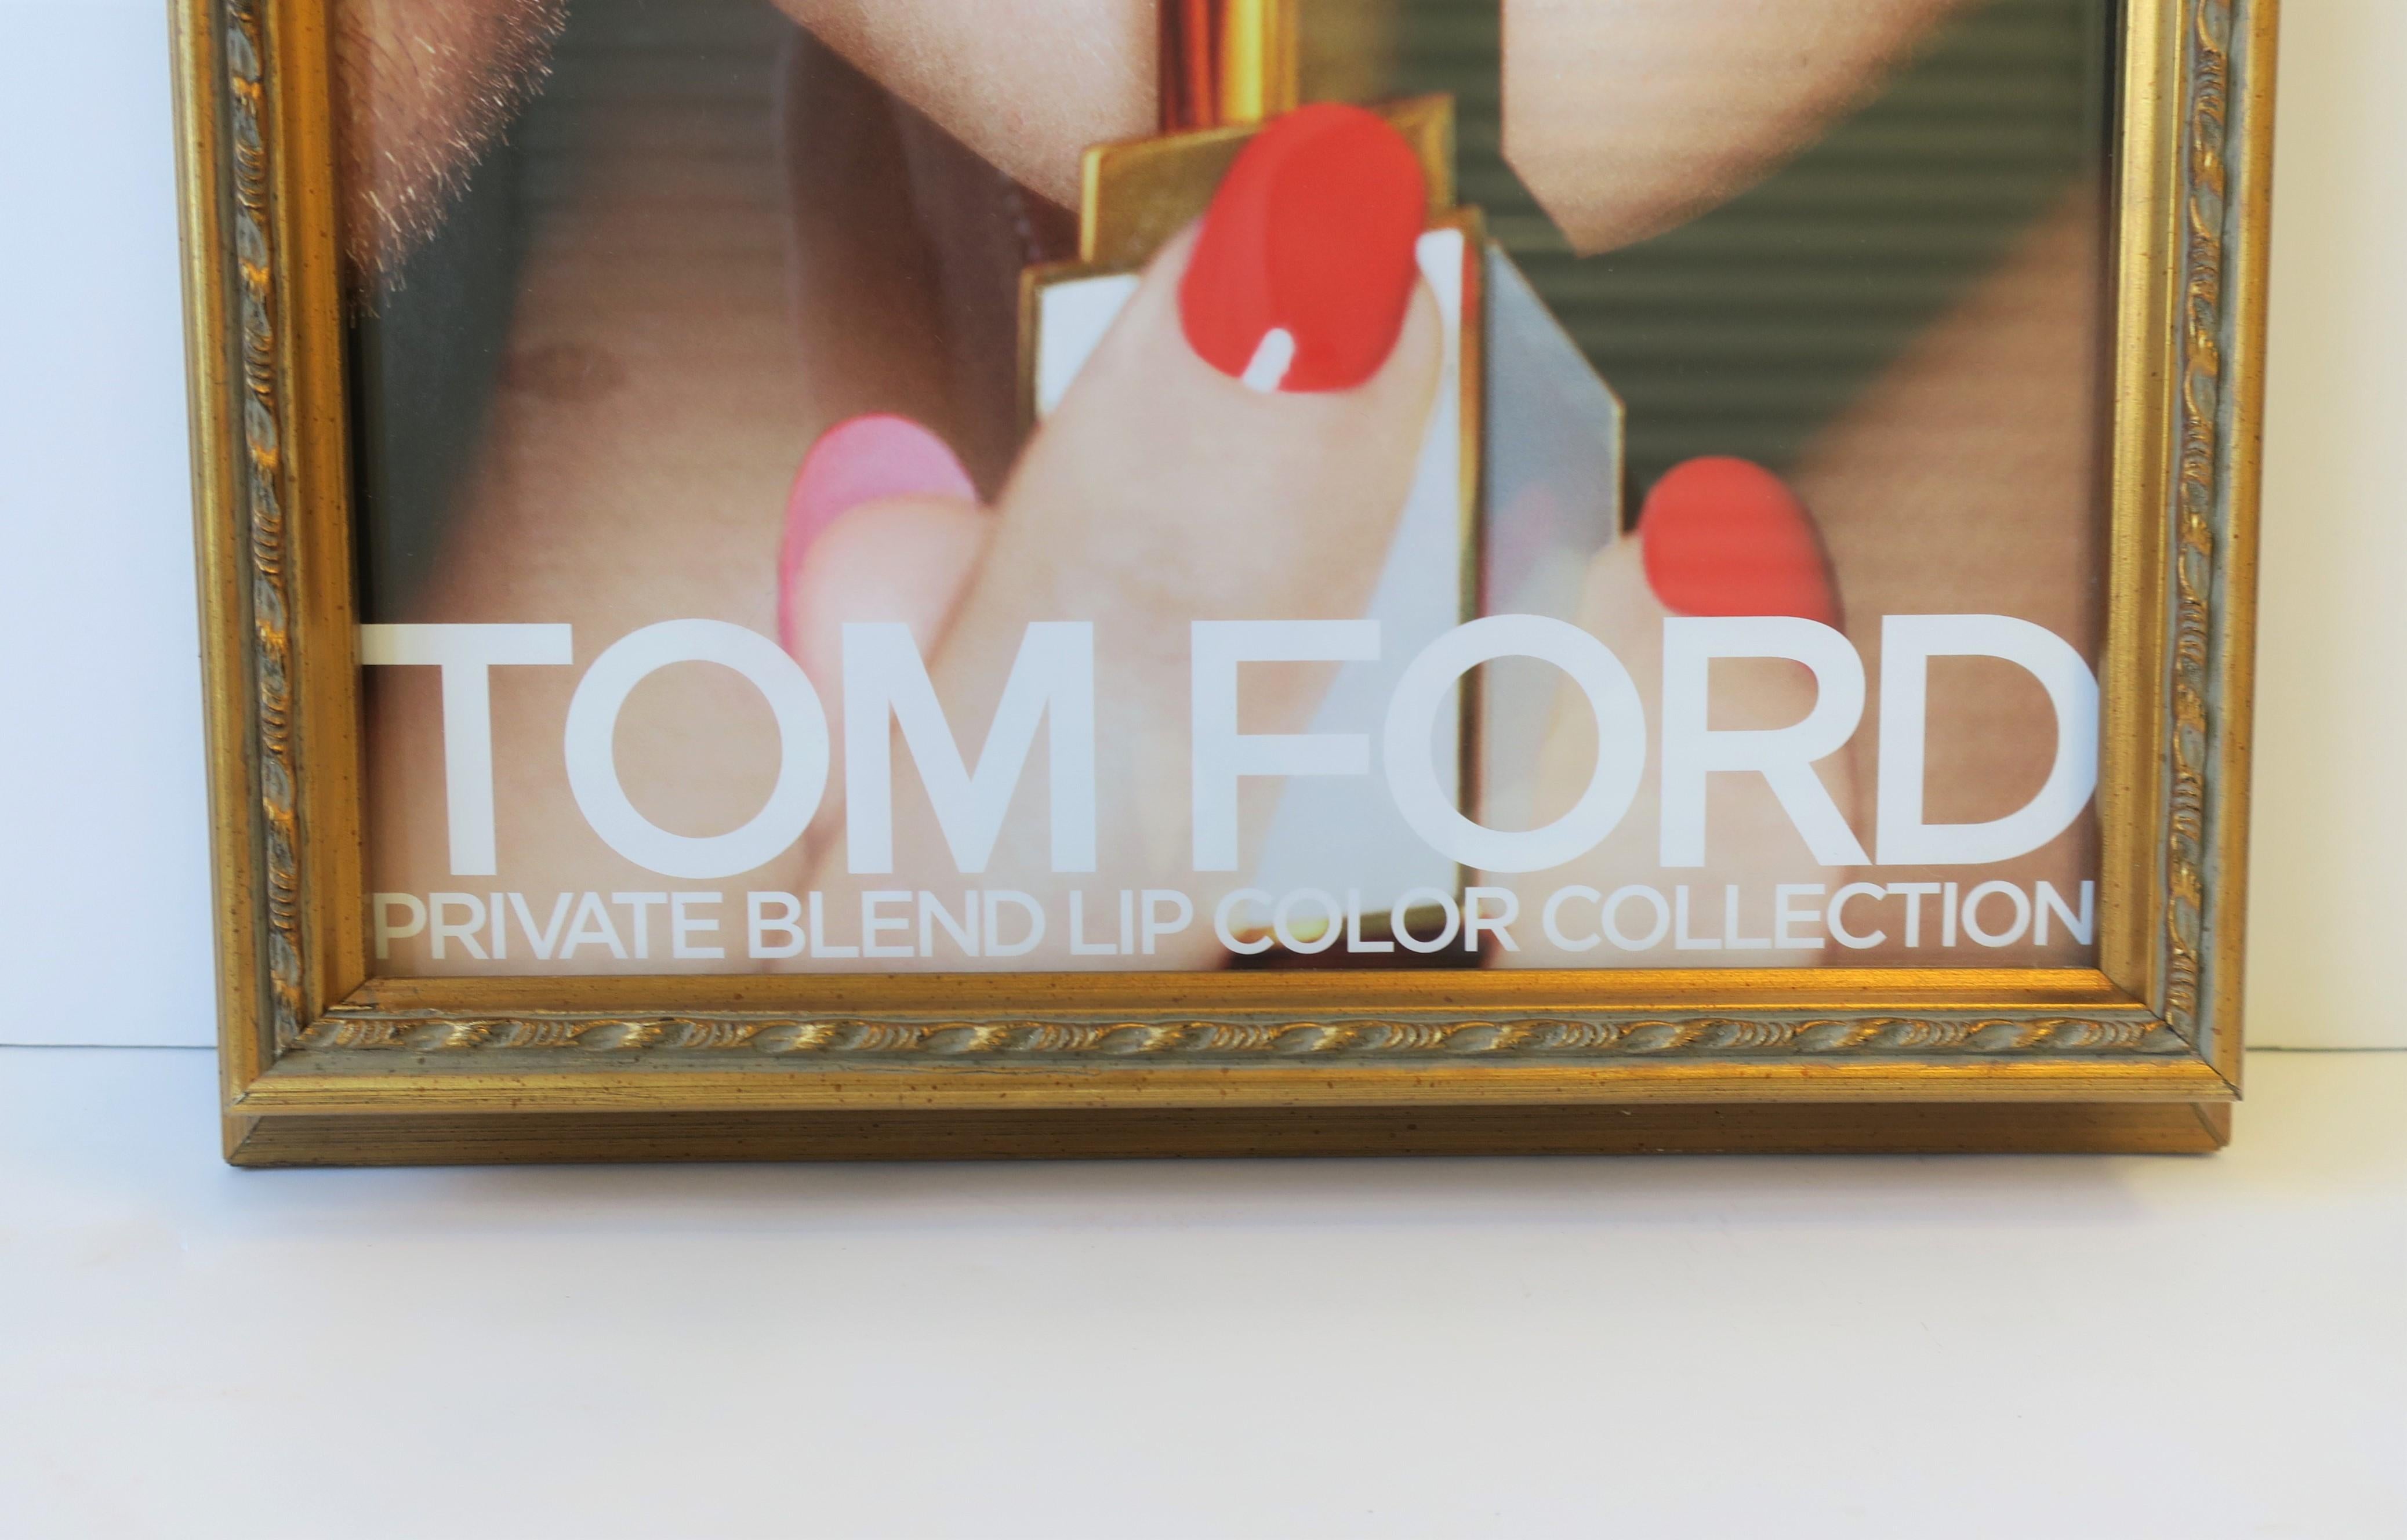 Contemporary Tom Ford Framed Makeup Print Advertisement Wall Art